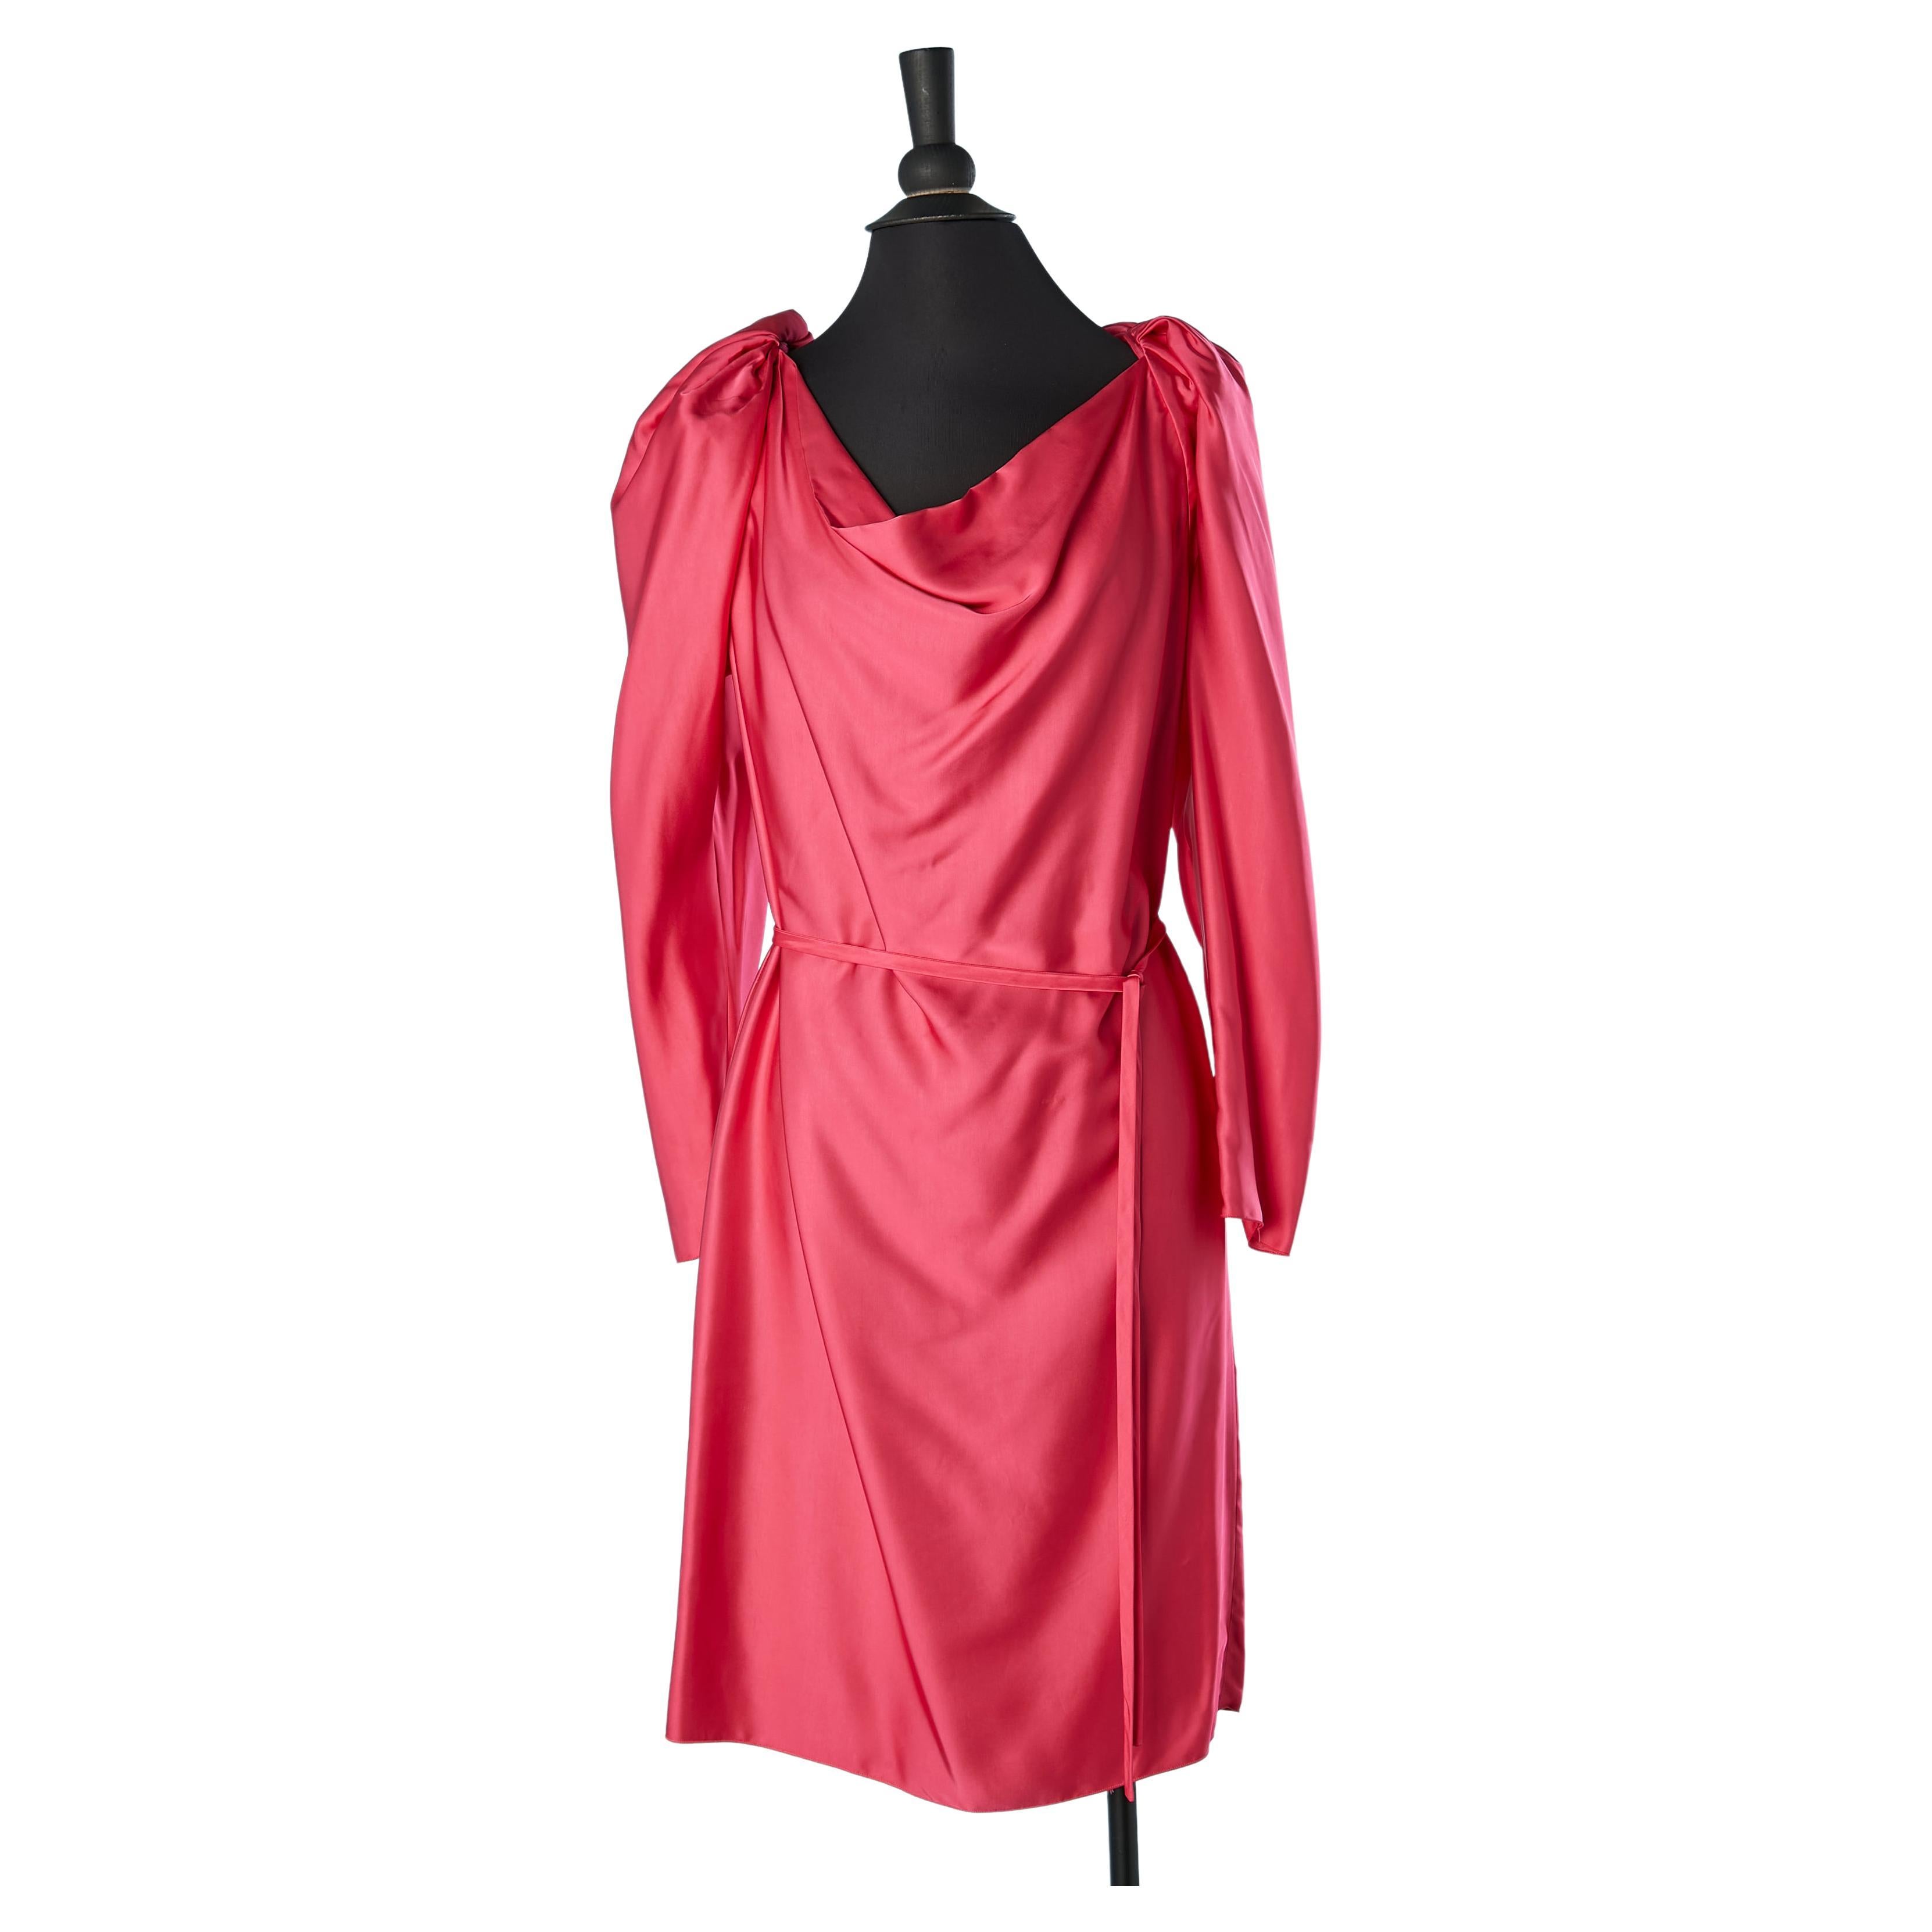 Fushia rayon cocktail dress  drape on the shoulders and belt Lanvin by A .Elbaz  For Sale